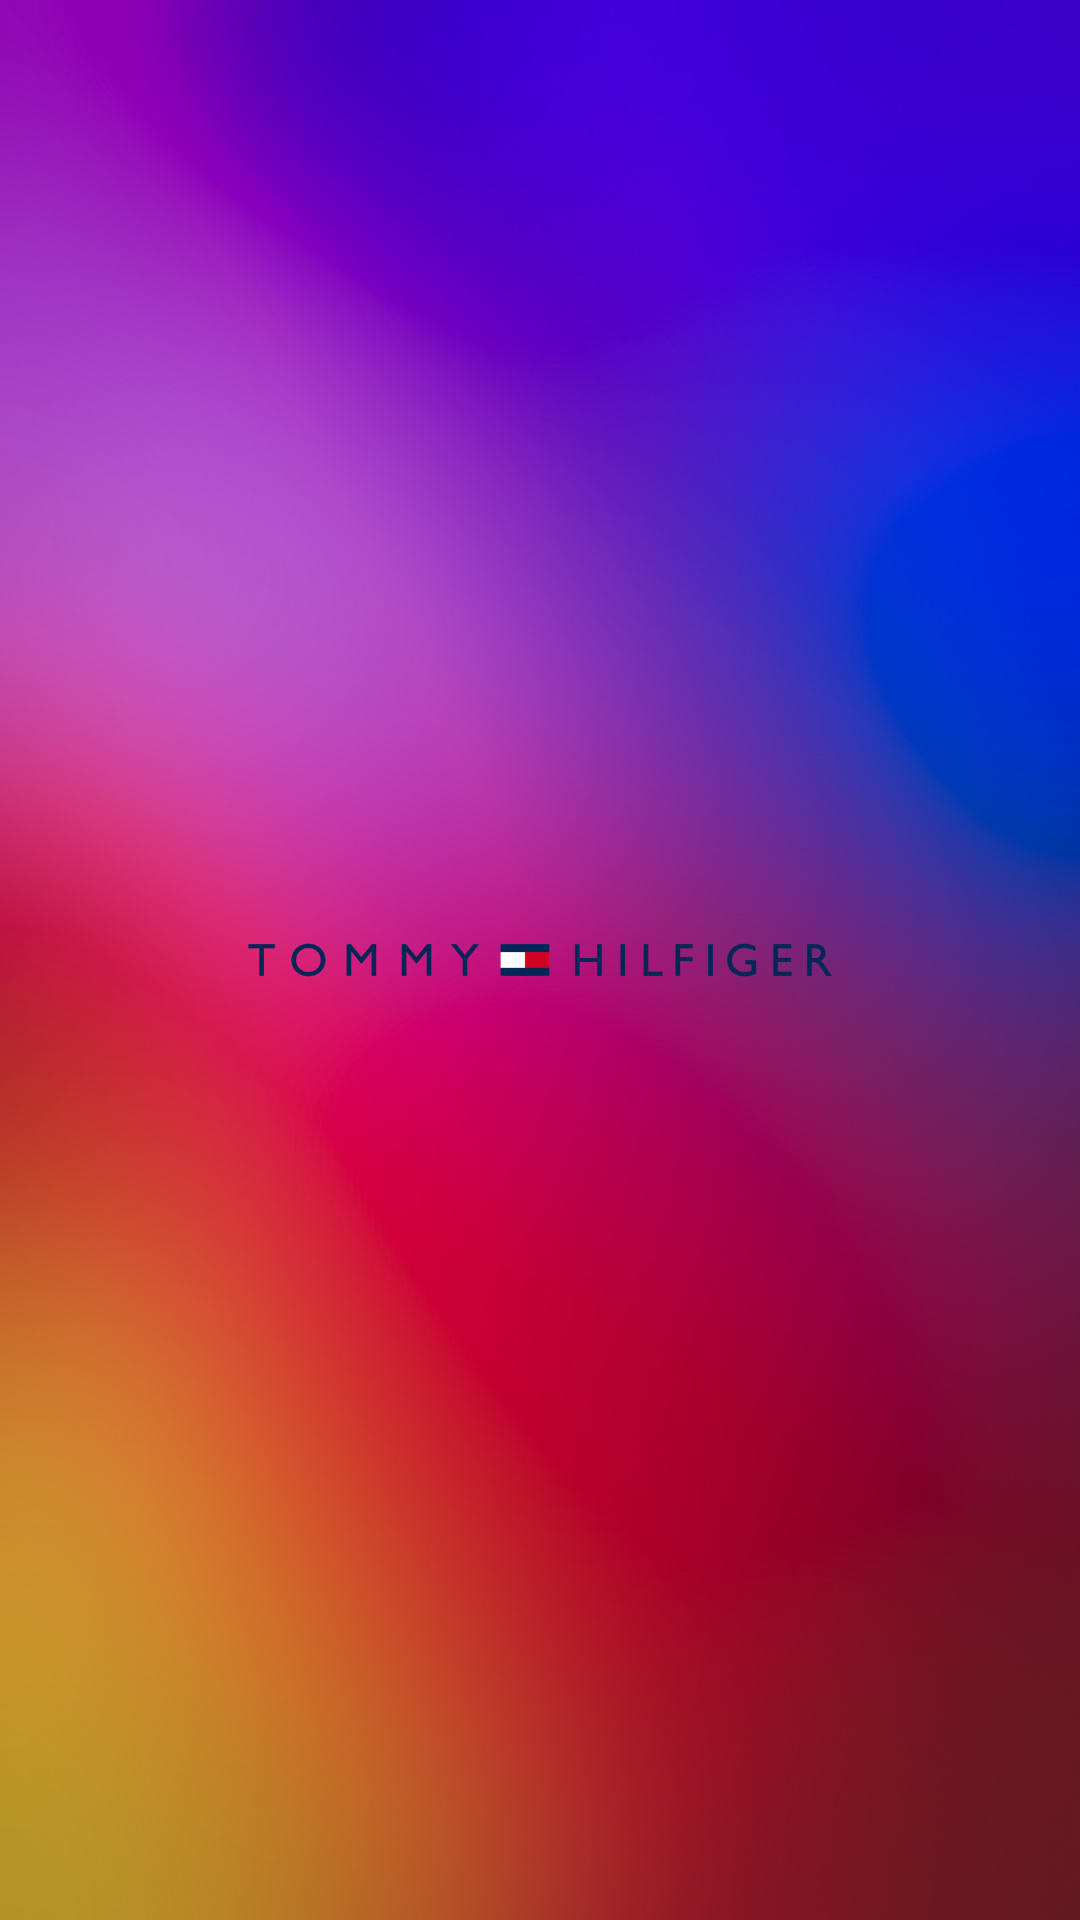 Tommy Hilfiger: Enormous success in the retail clothing market, All-American designs. 1080x1920 Full HD Wallpaper.